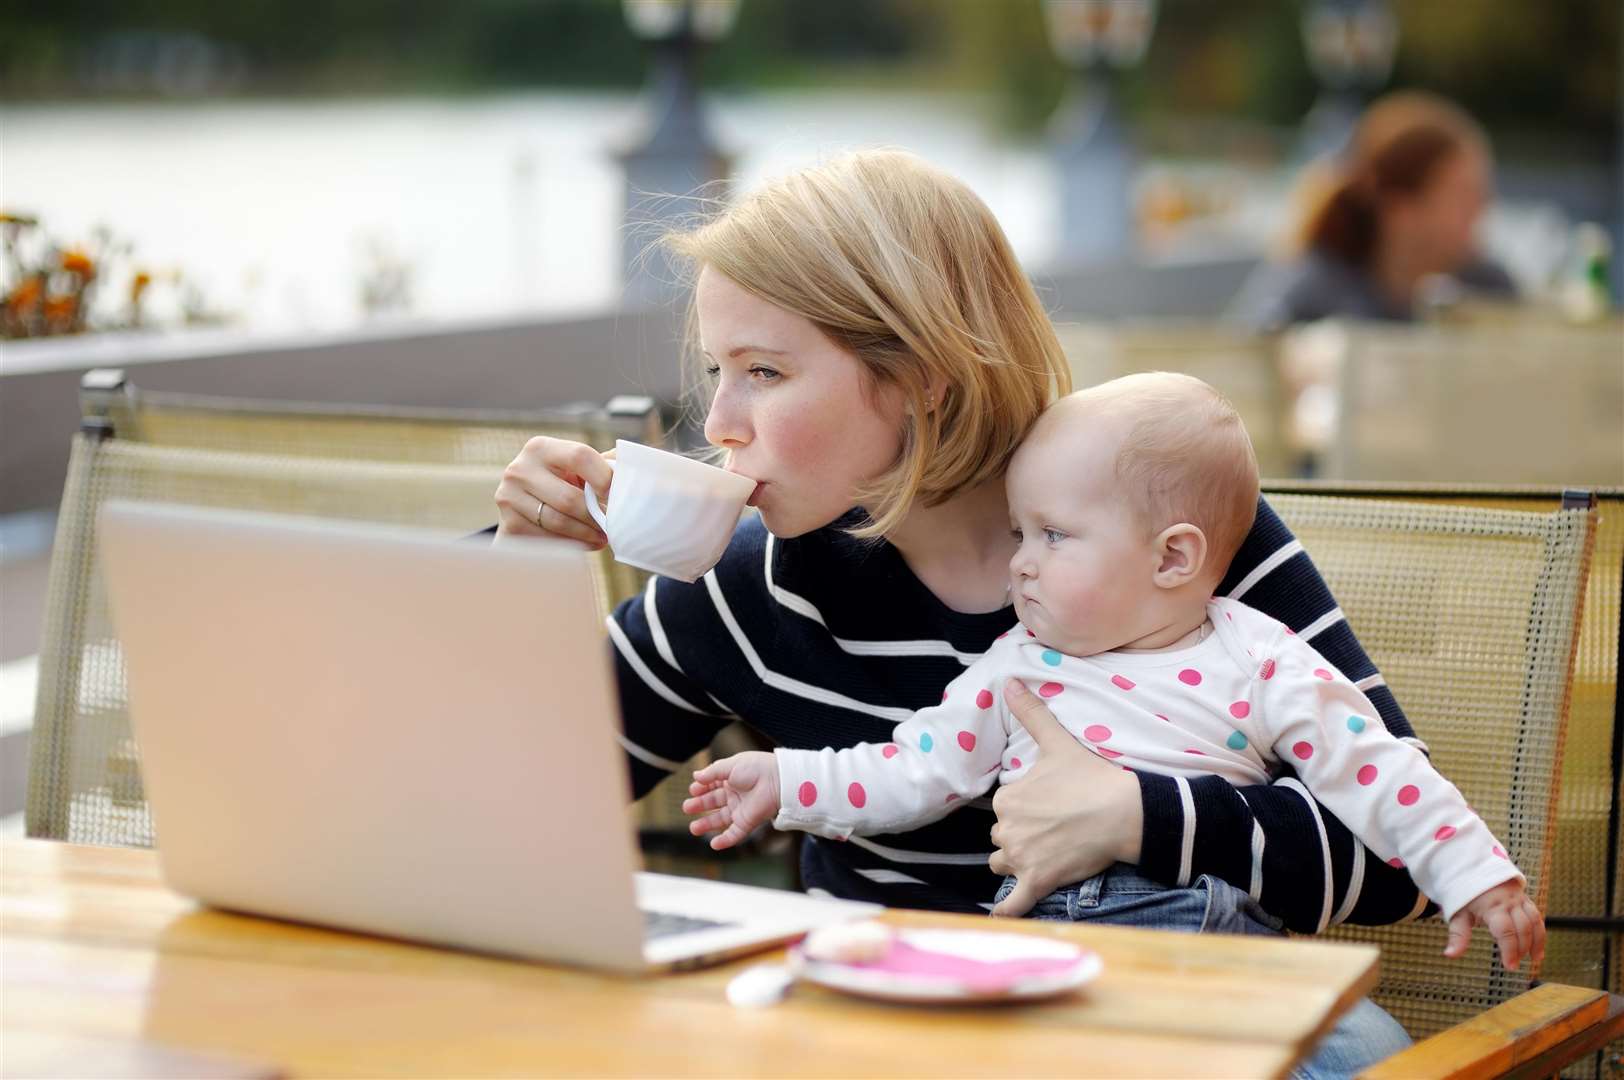 In 40 years the number of working mothers has risen from half of all mothers to nearly three-quarters